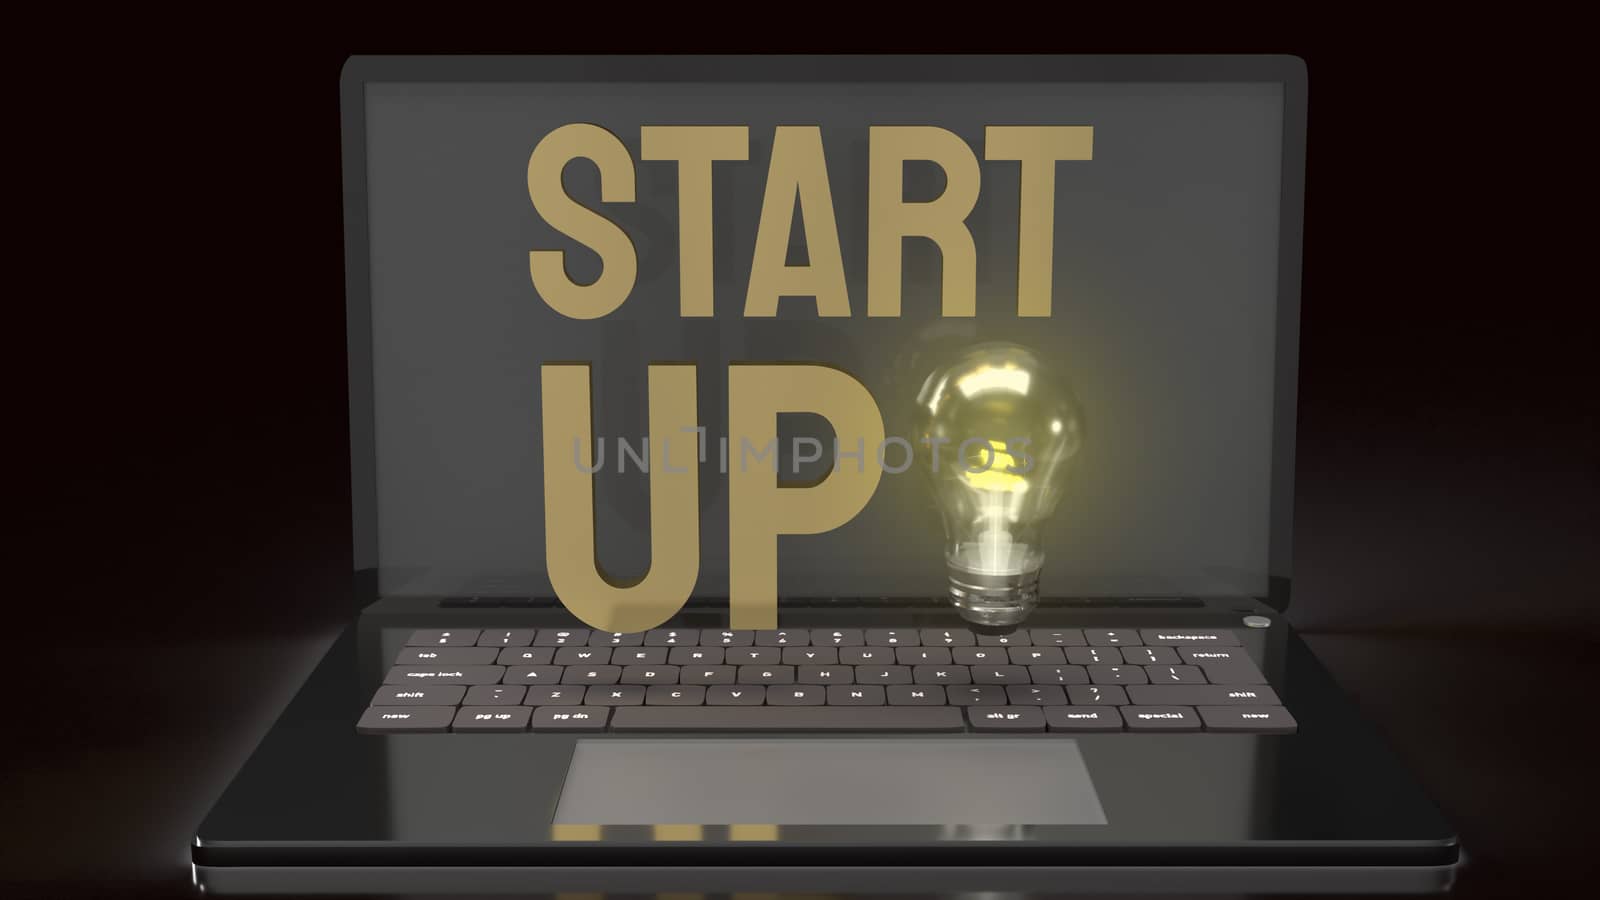 The light bulb and start up text  on notebook for idea content 3d rendering.
